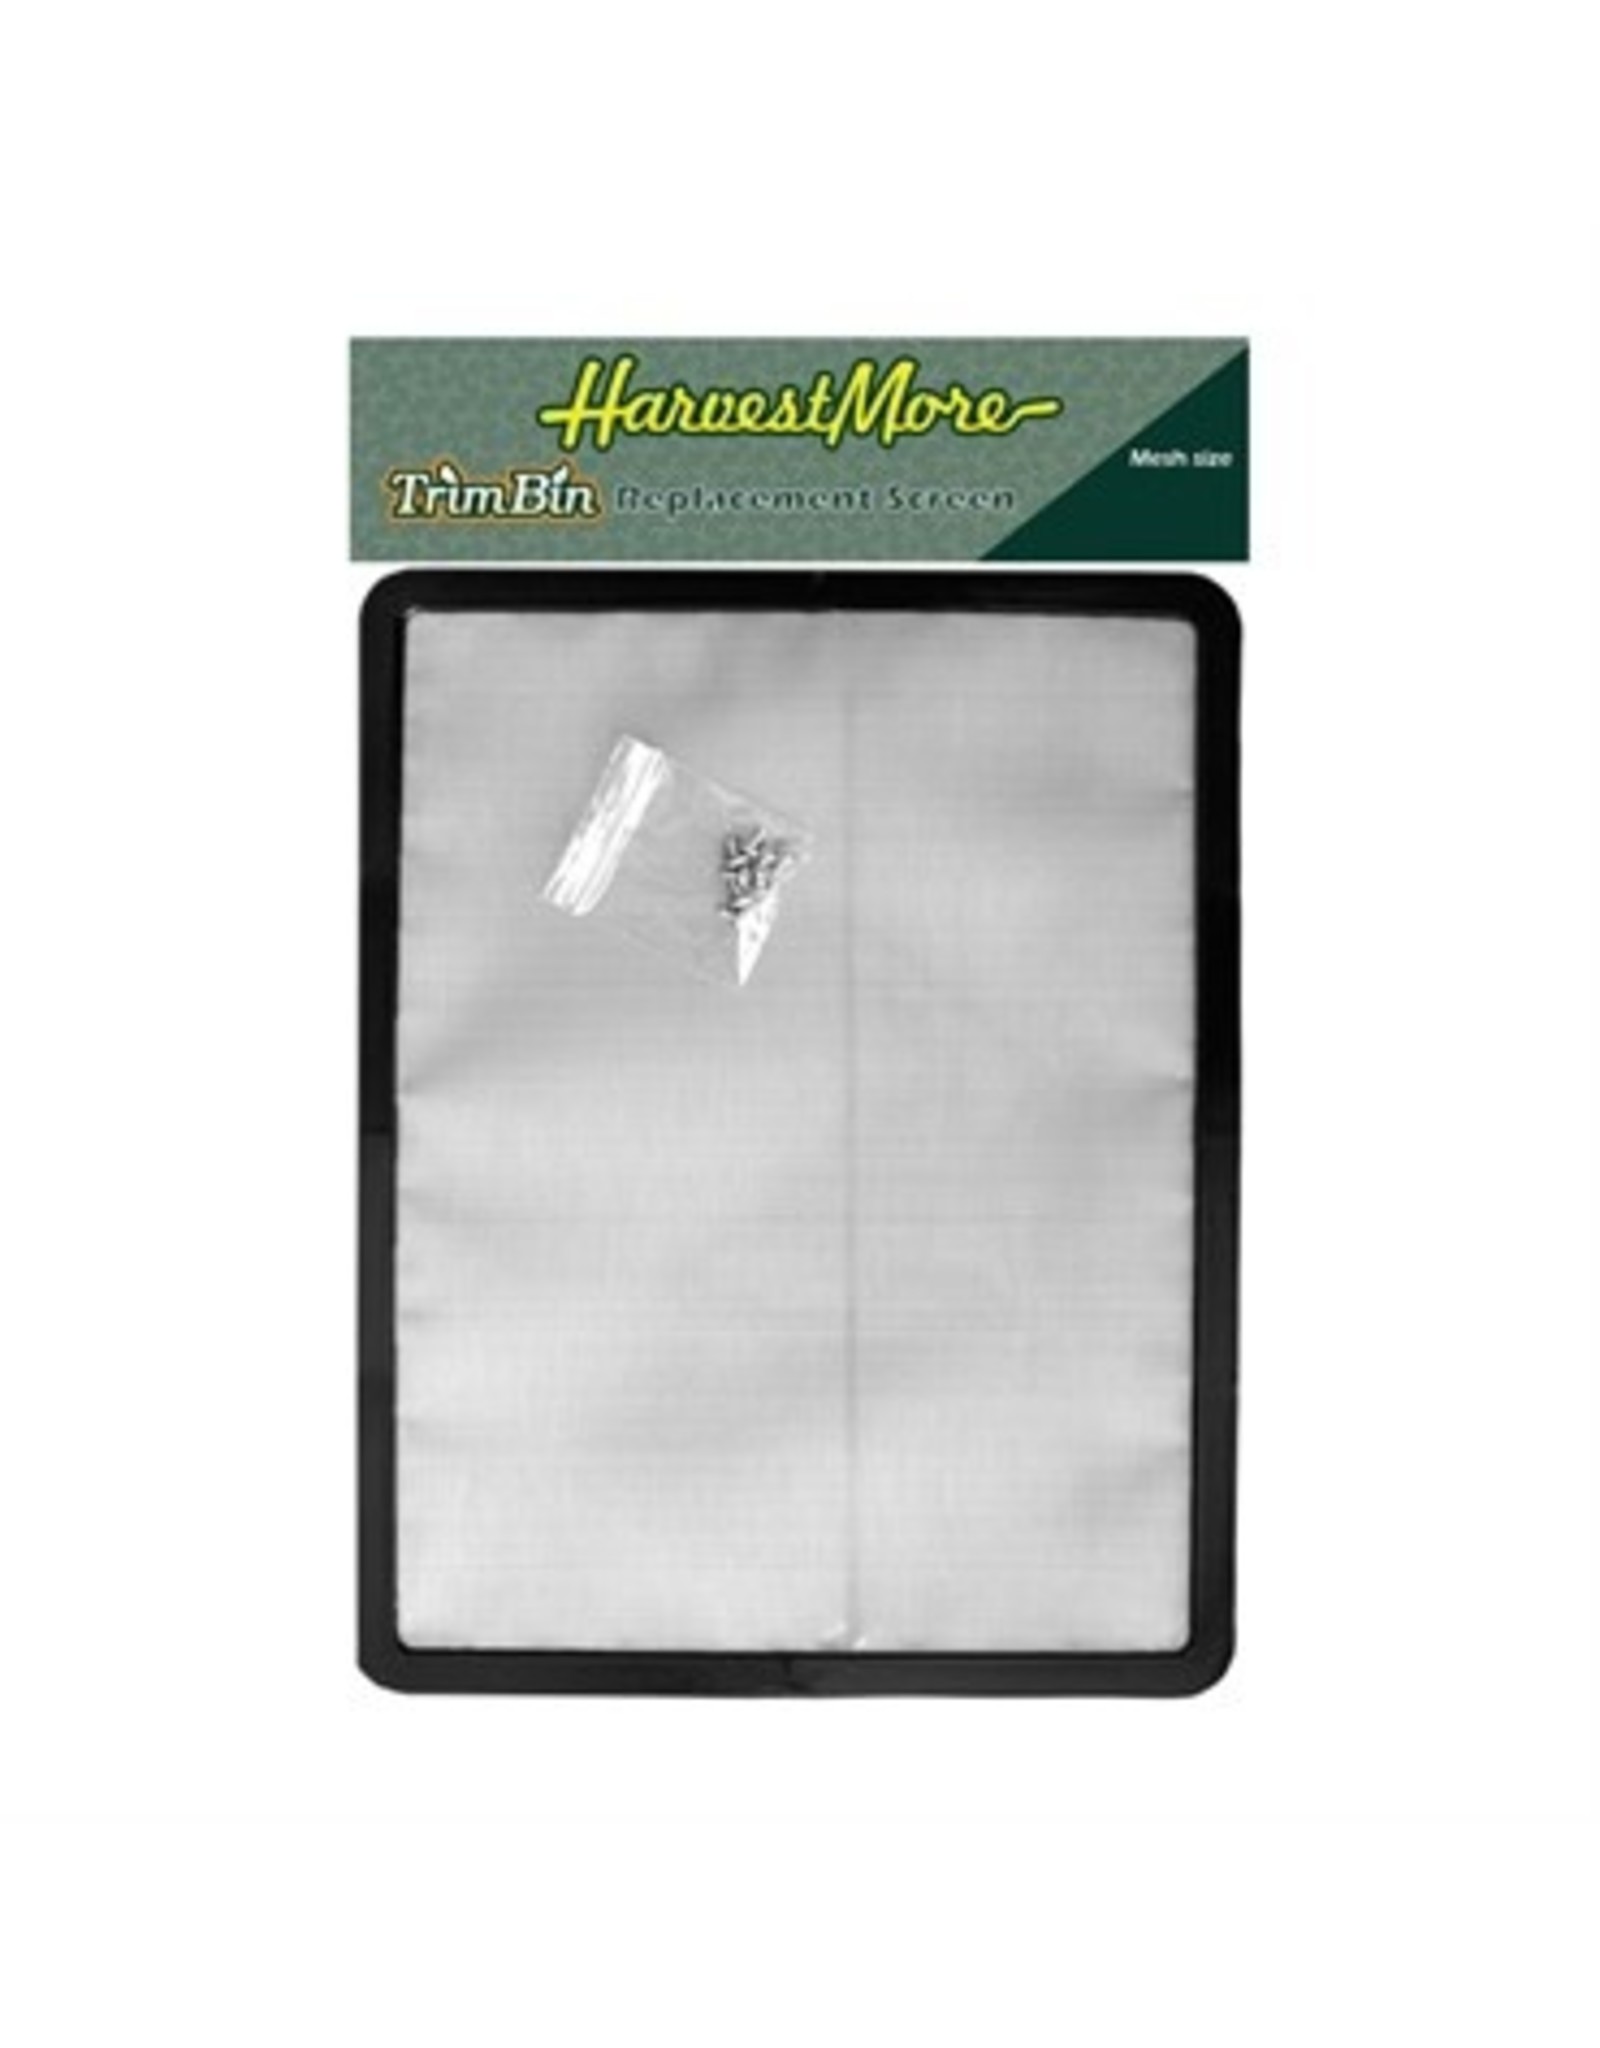 Harvest More Trim Bin Replacement Screen (150 Micron) - Brew & Grow  Hydroponics and Homebrewing Supplies of Chicagoland